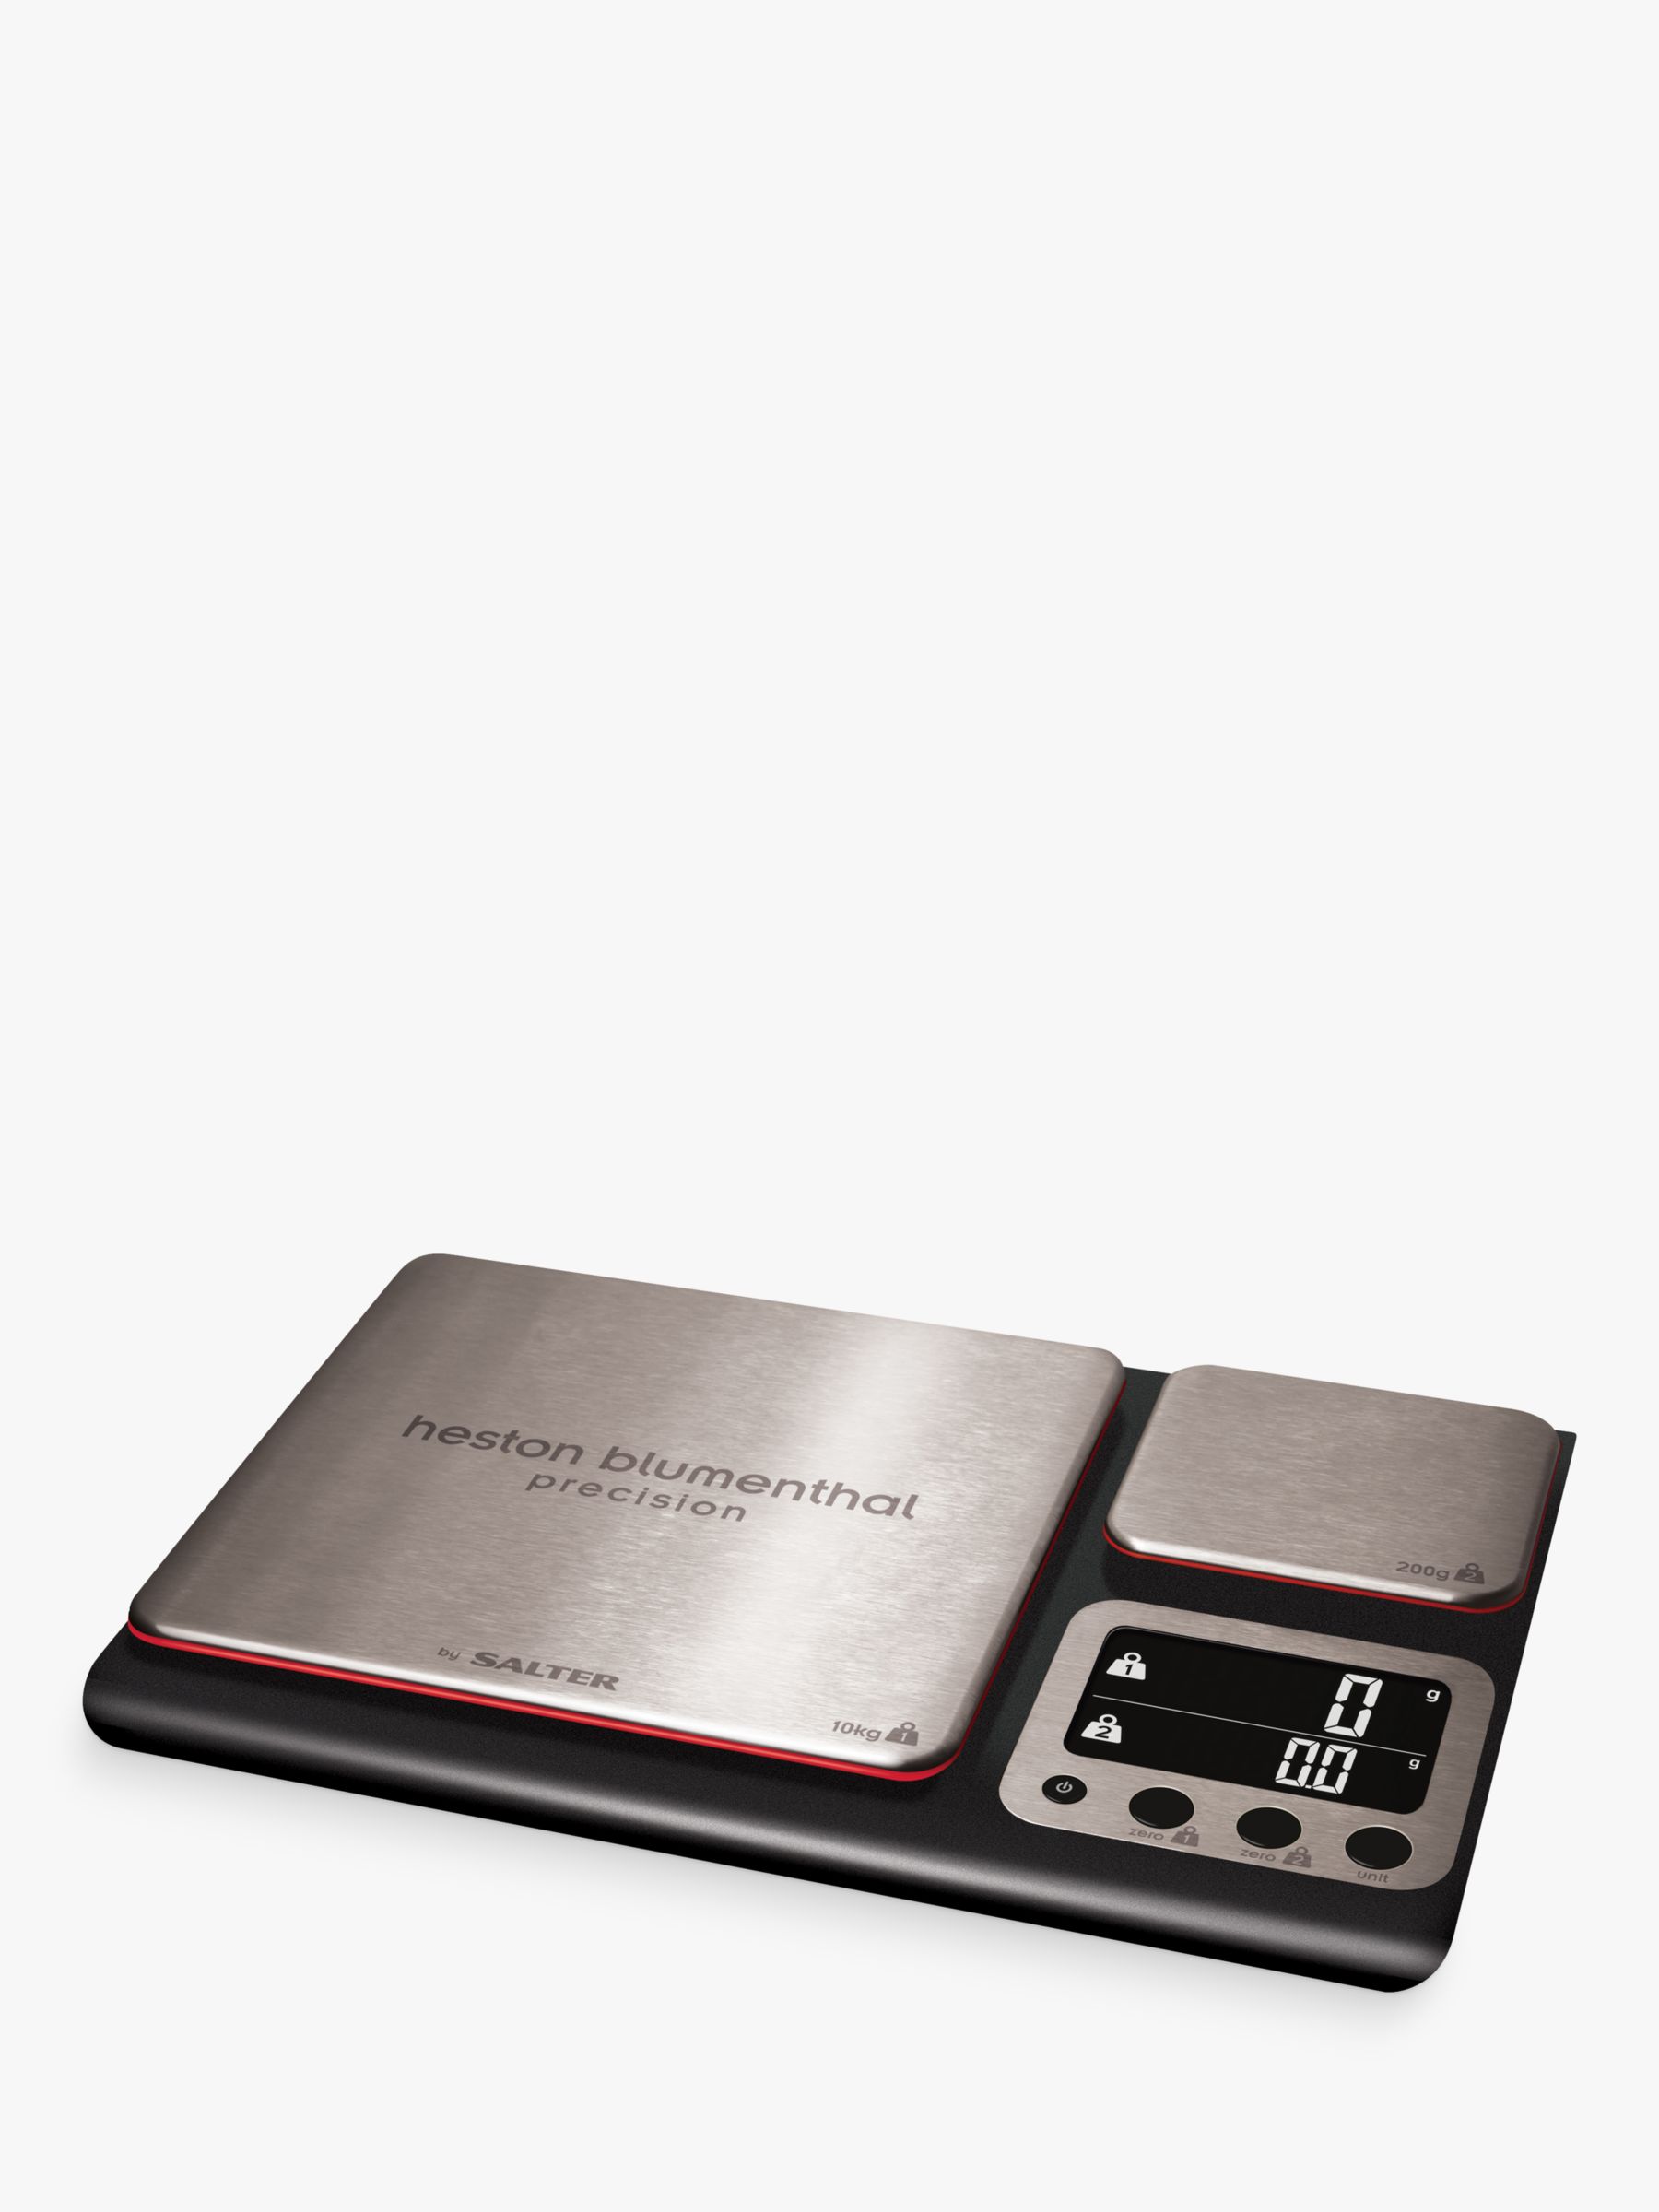 Photo of Heston blumenthal by salter dual precision digital scale 10kg